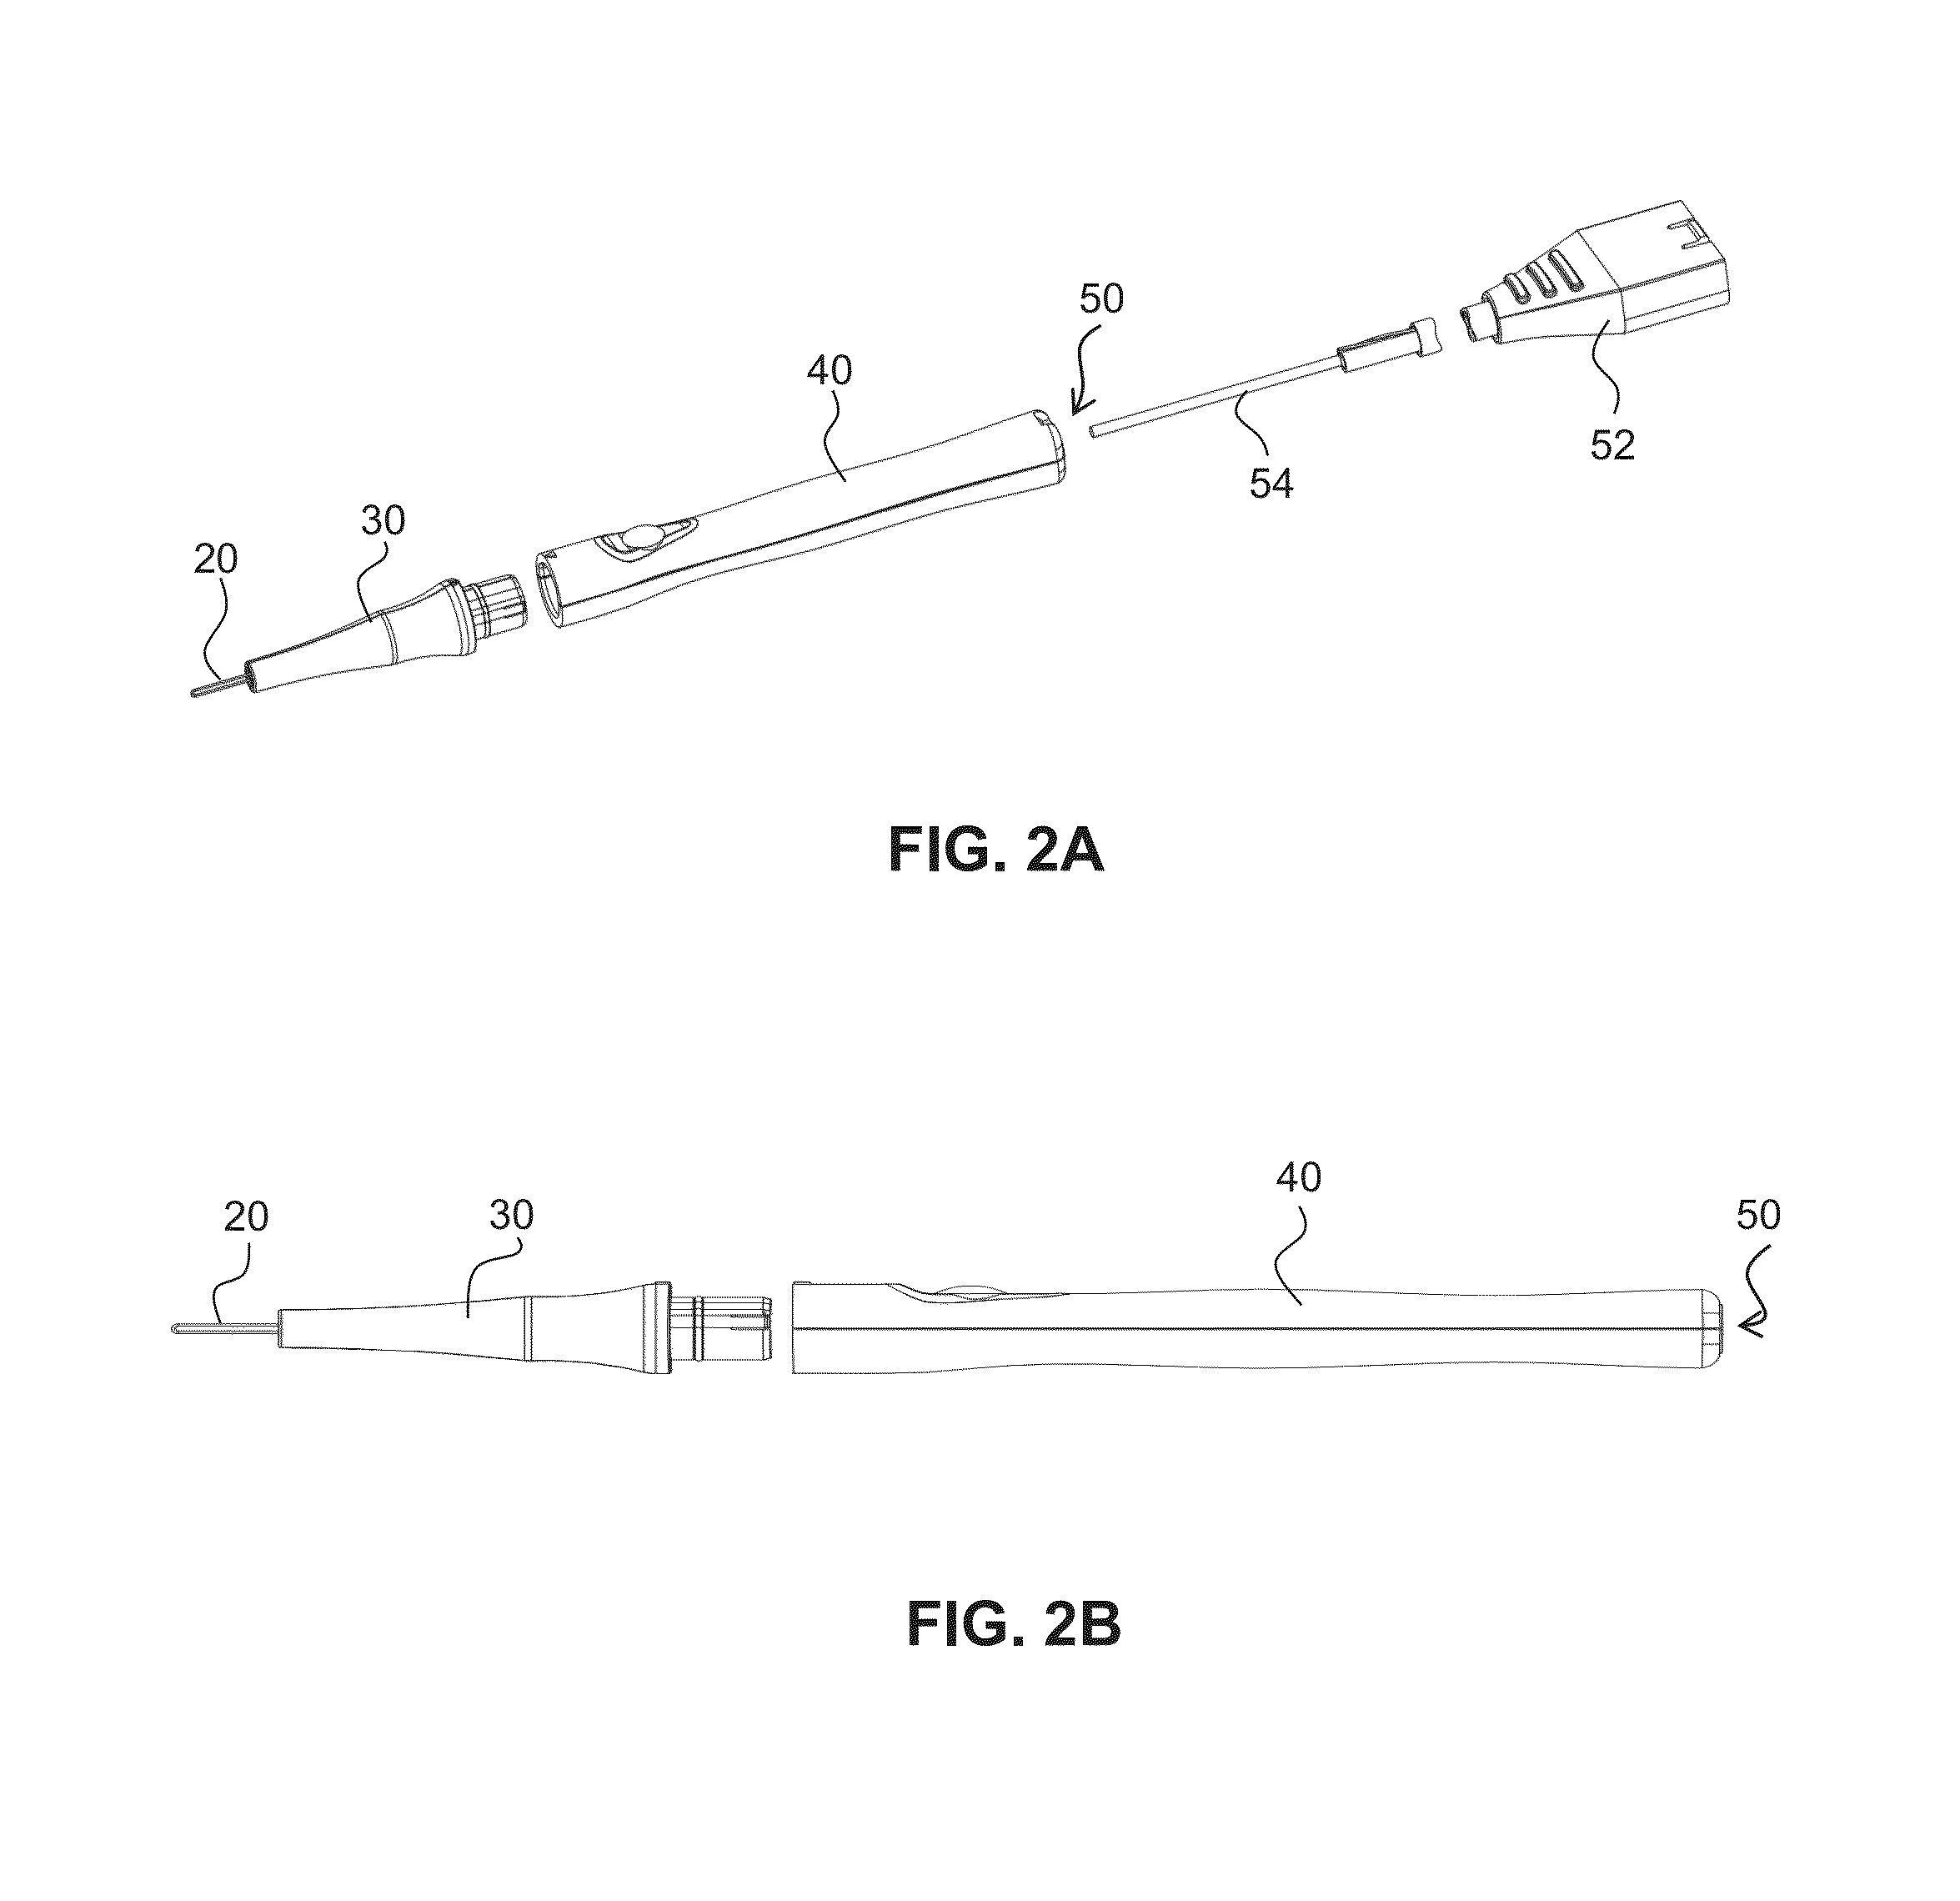 System and method for cooling of a heated surgical instrument and/or surgical site and treating tissue